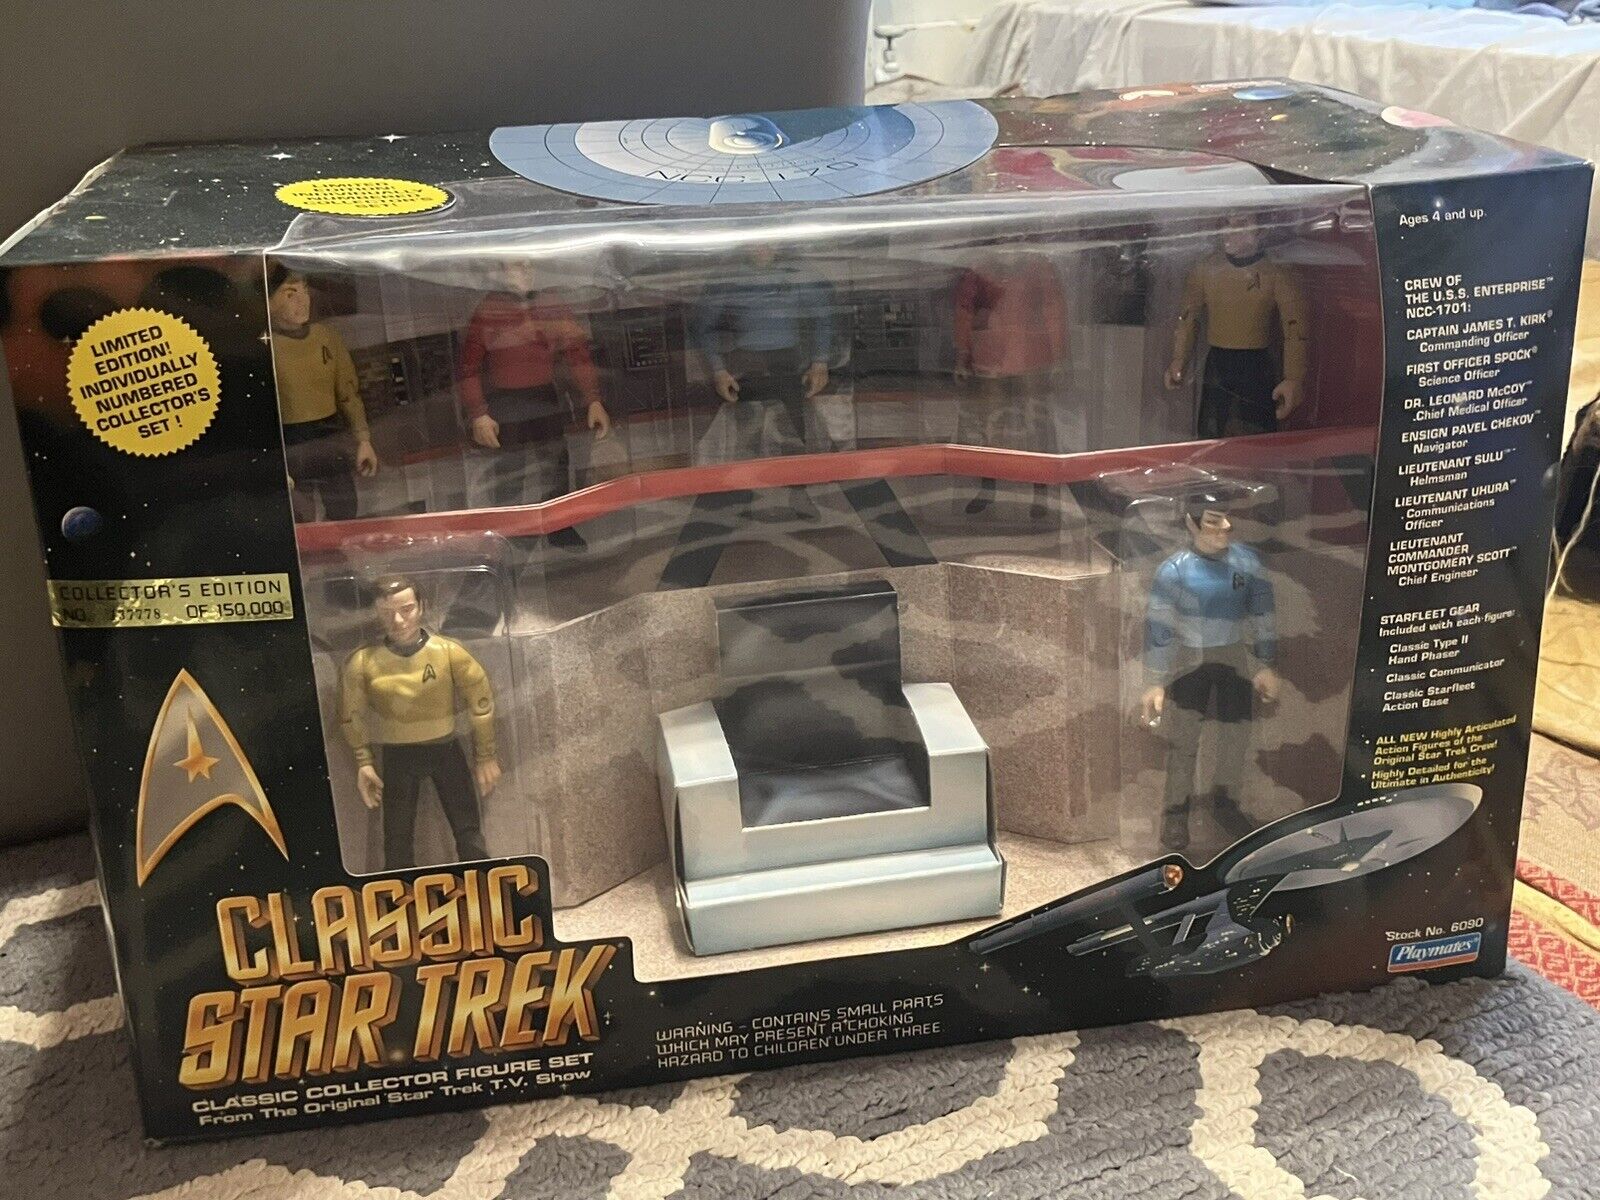 Classic Star Trek Limited Edition Collector's Set